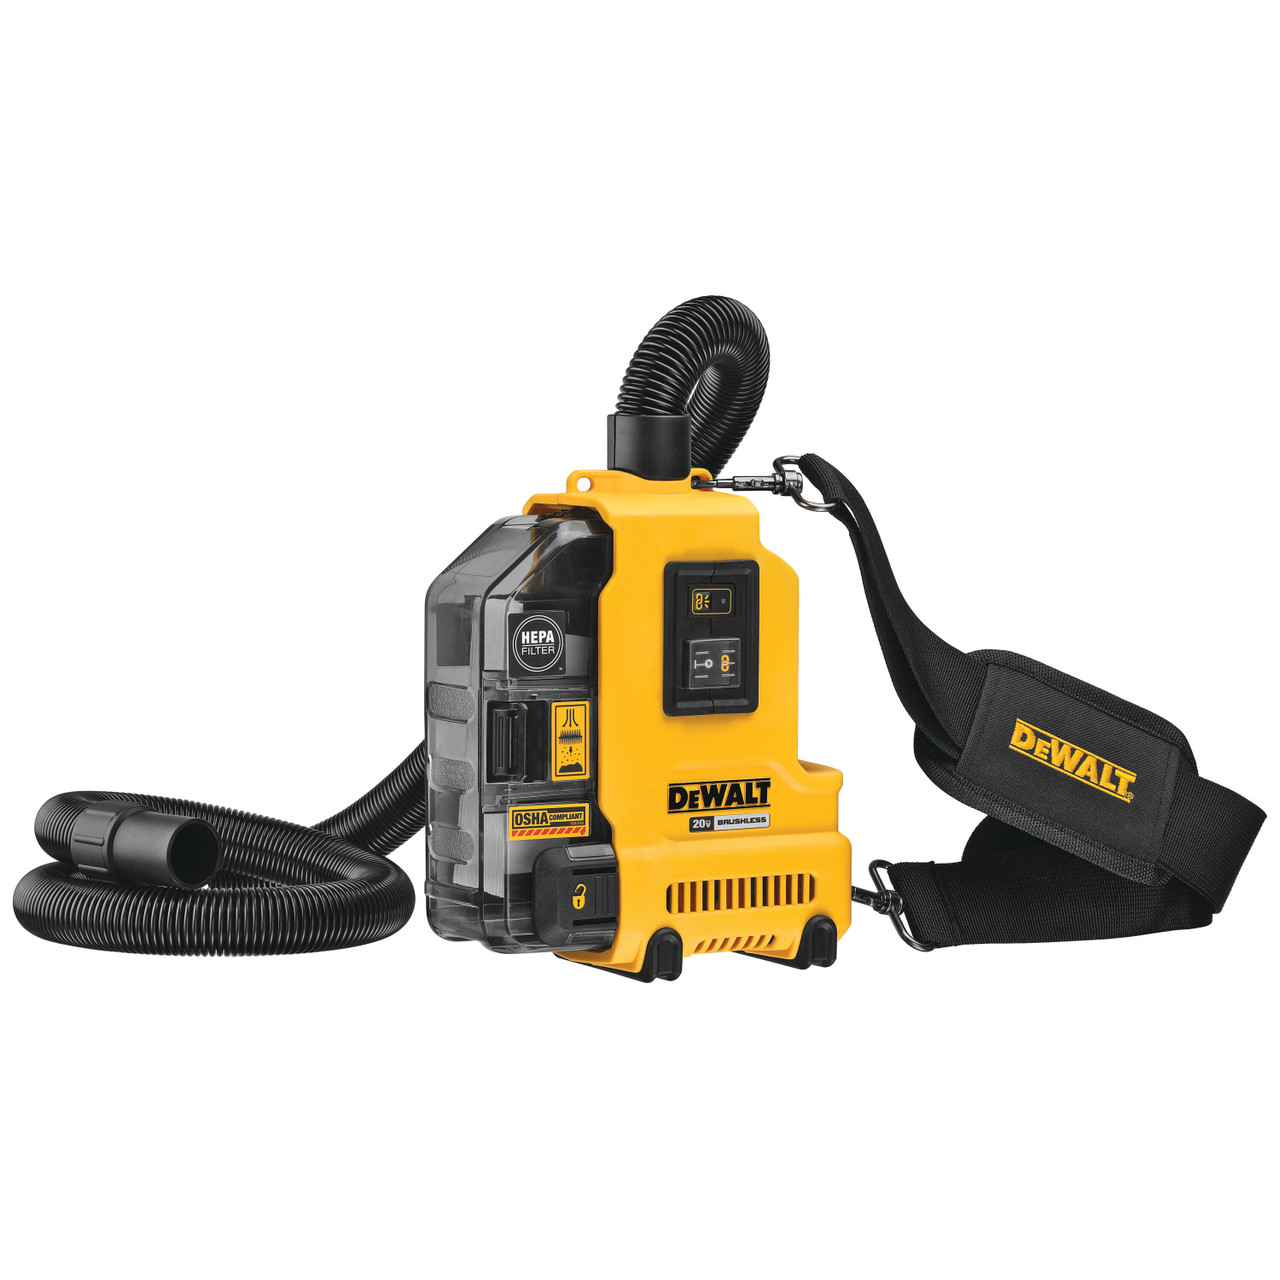 DEWALT DEW-DWH161B 20V MAX Brushless Universal Dust Extractor (Tool Only)  Atlas-Machinery